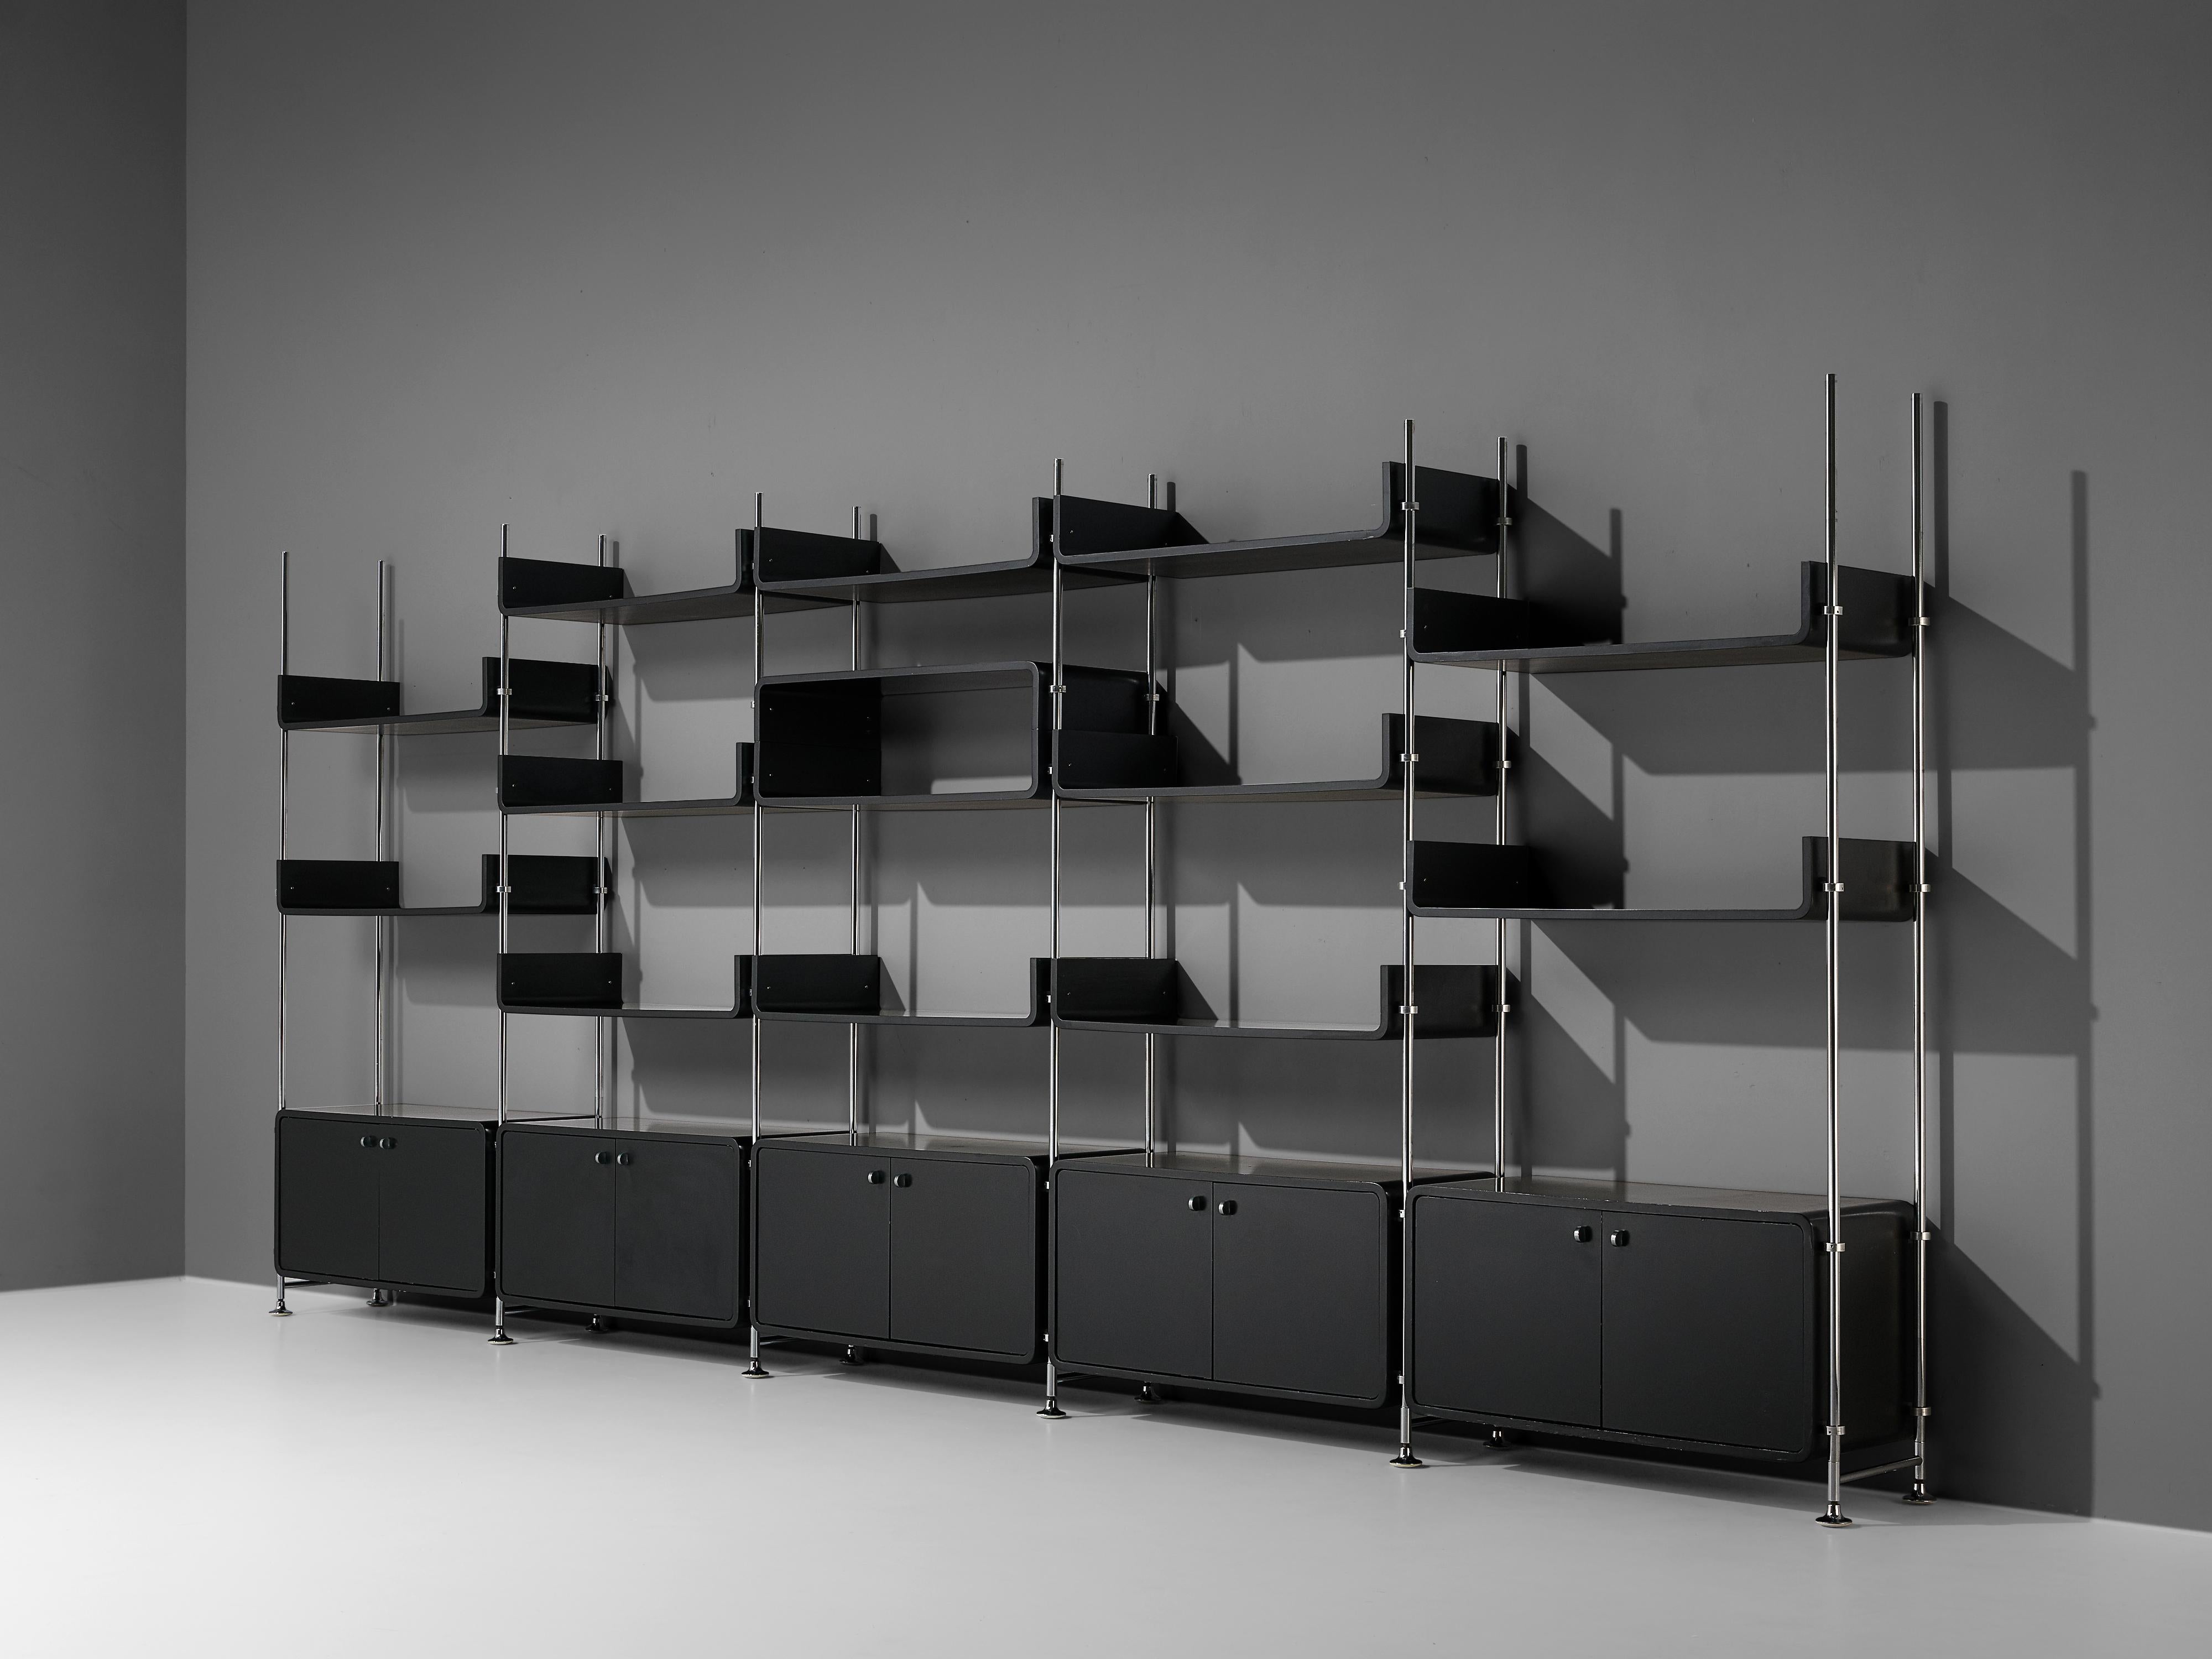 Michael Ducaroy, free-standing wall unit, chrome-plated steel, lacquered wood, France, 1970s

Sleek and stunning free-standing wall unit designed by Michael Ducaroy in the 1970s. In five columns are five closed cabinets and multiple shelves to find.